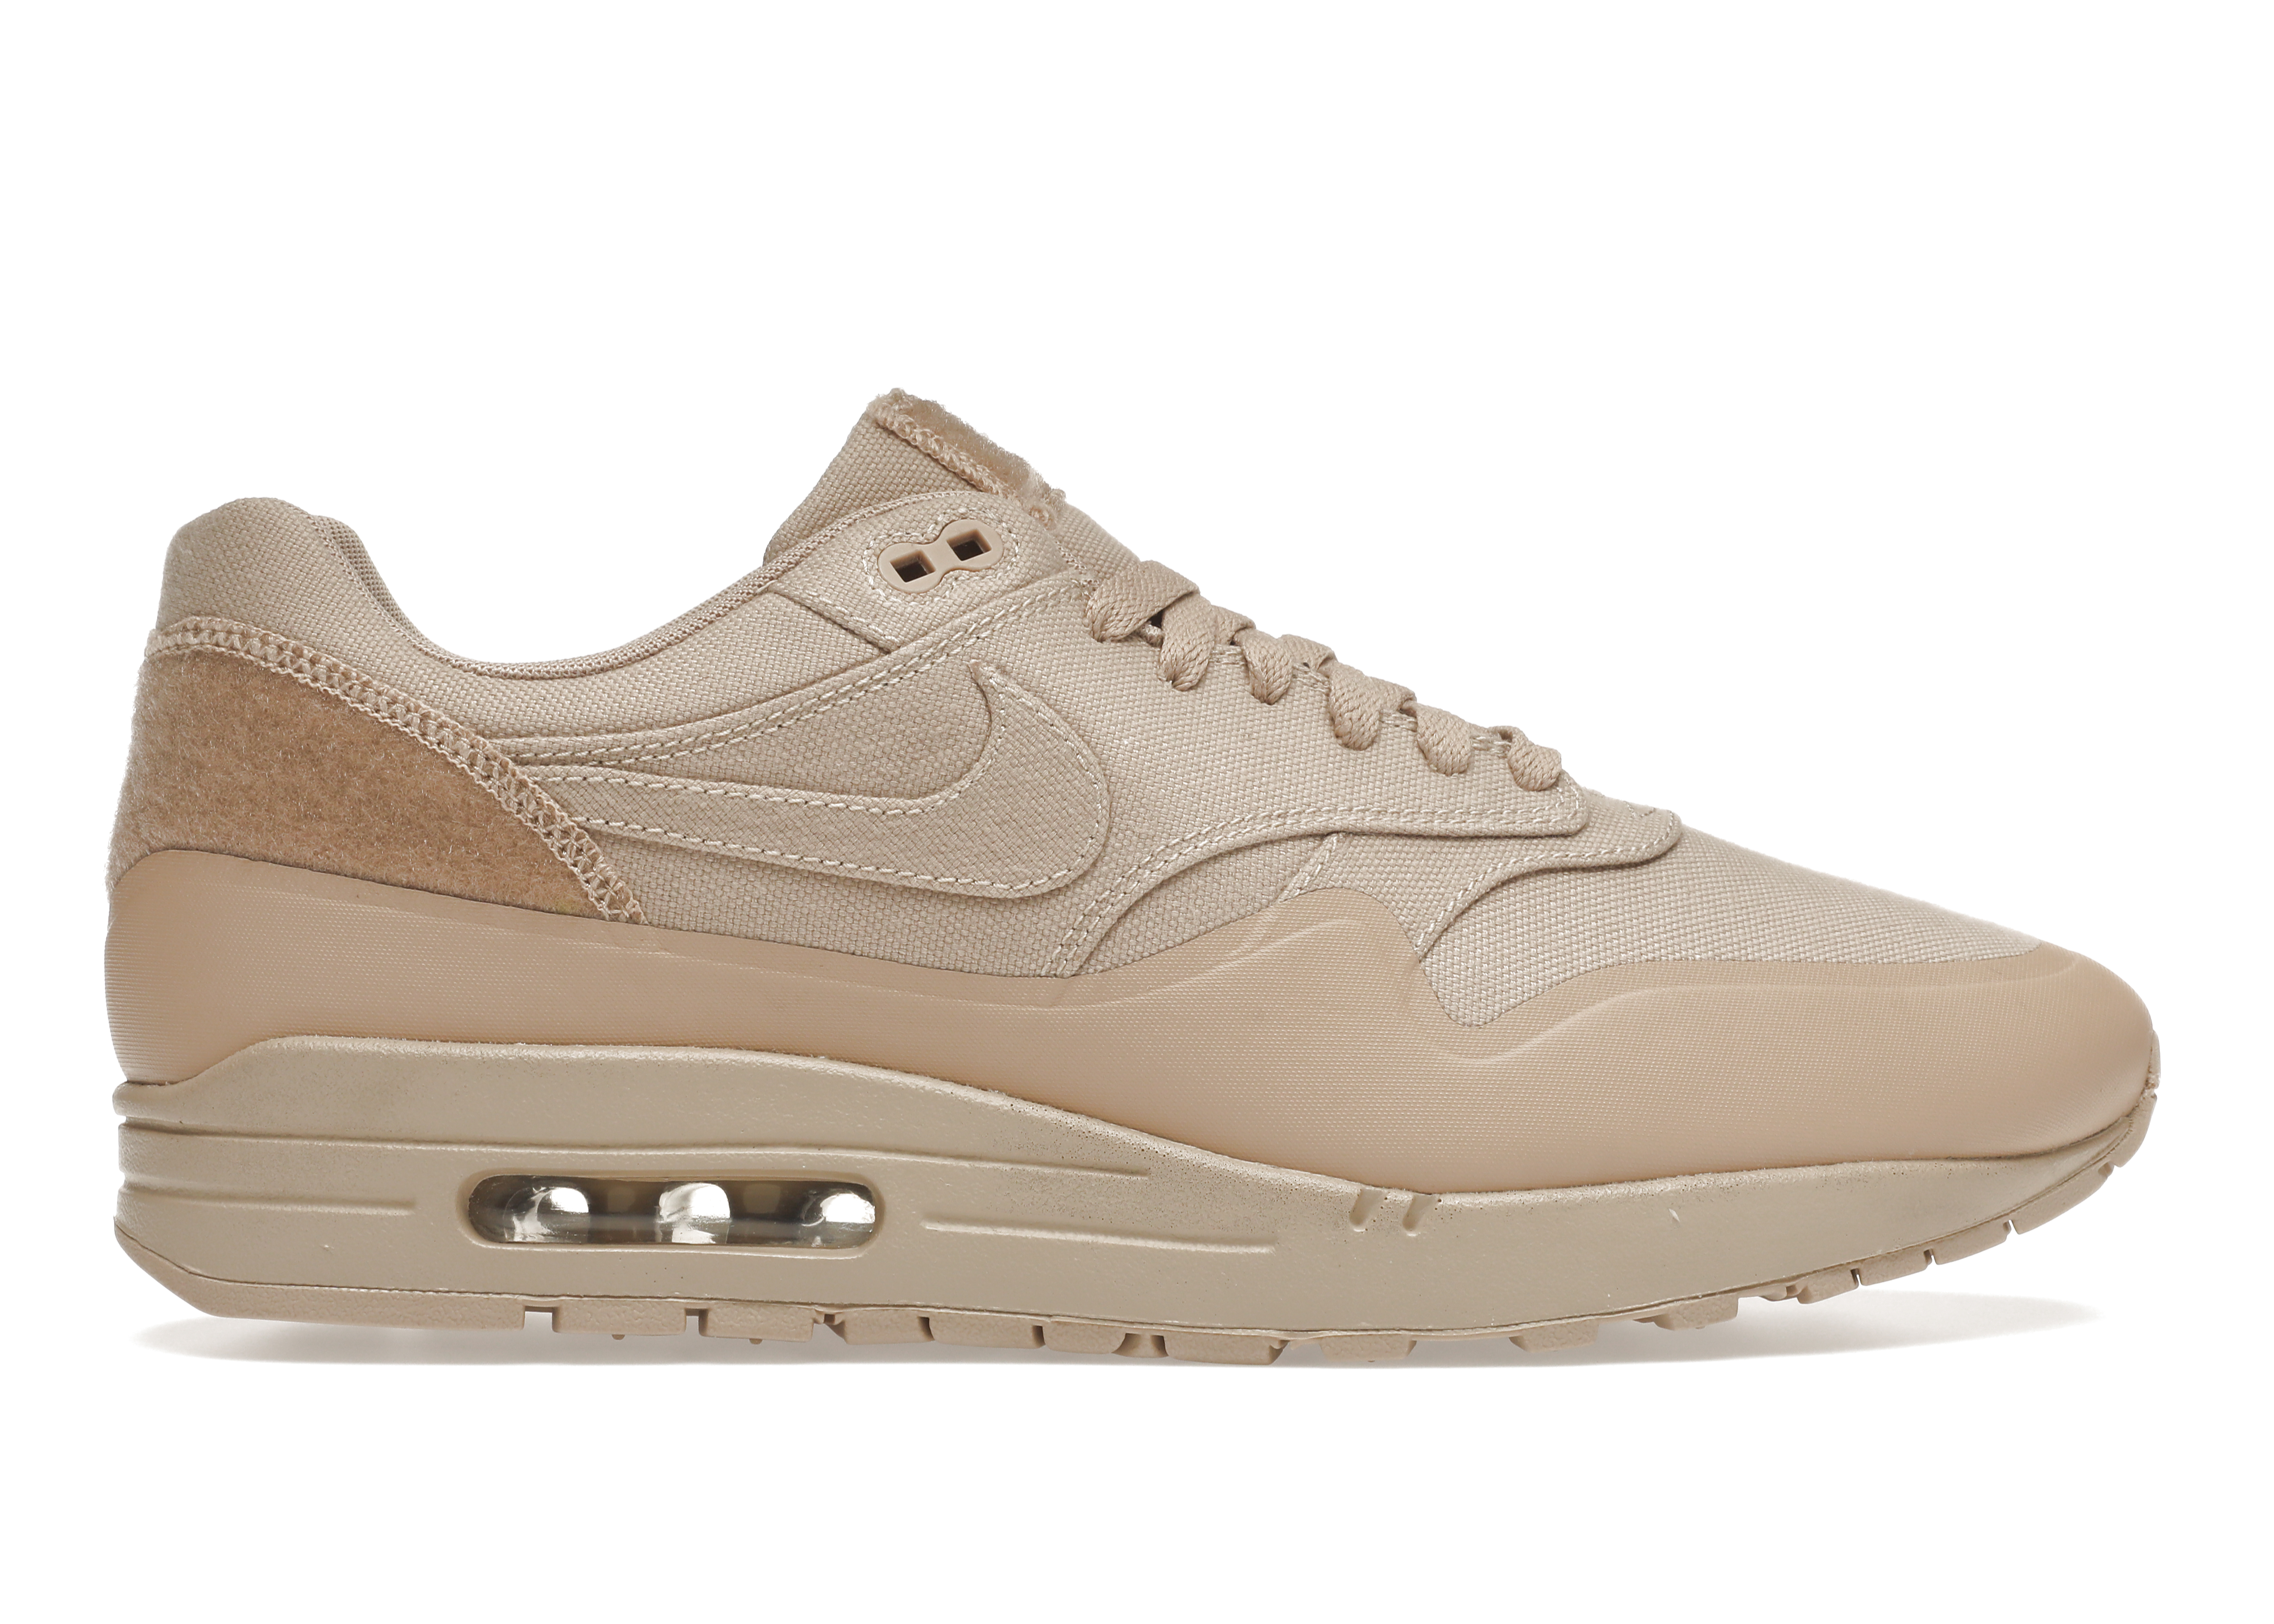 Nike Air Max 1 Patch Sand - 704901-200